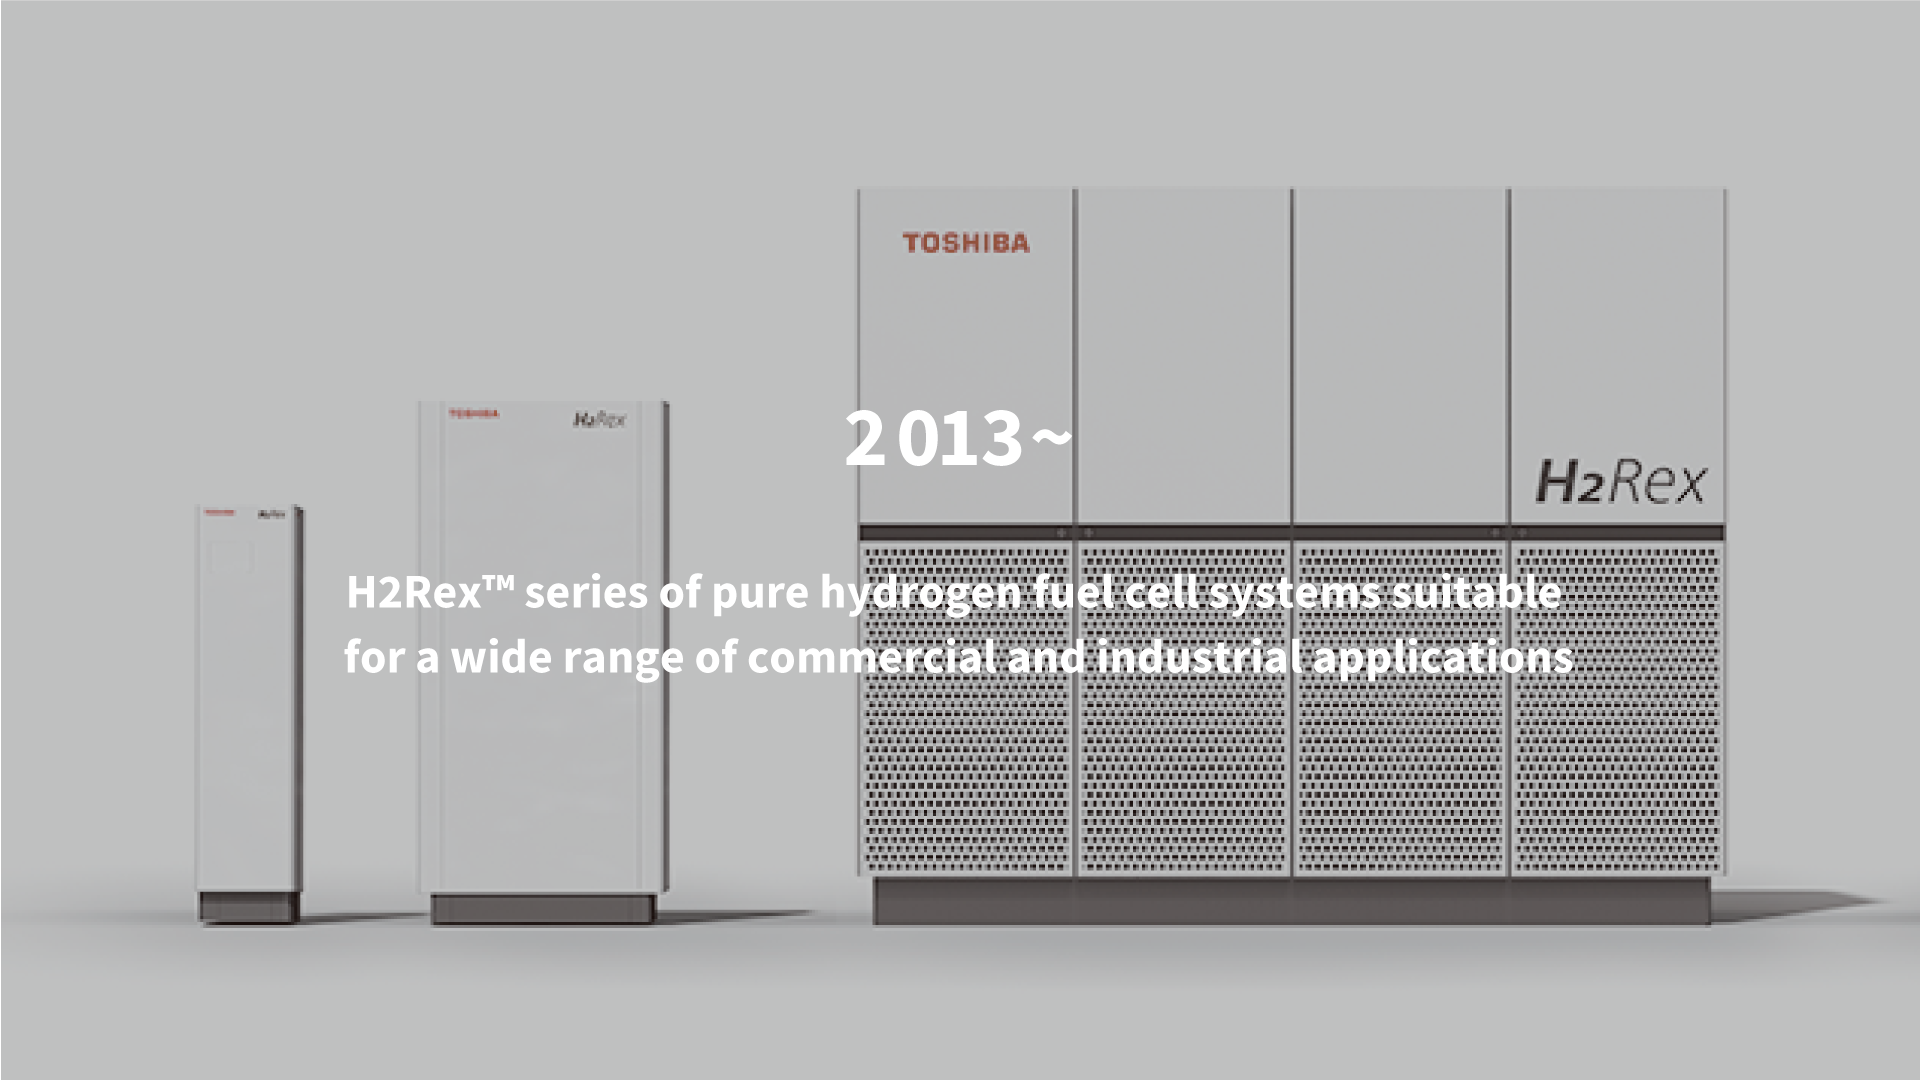 2013 H2Rex™ series of pure hydrogen fuel cell systems suitable for a wide range of commercial and industrial applications